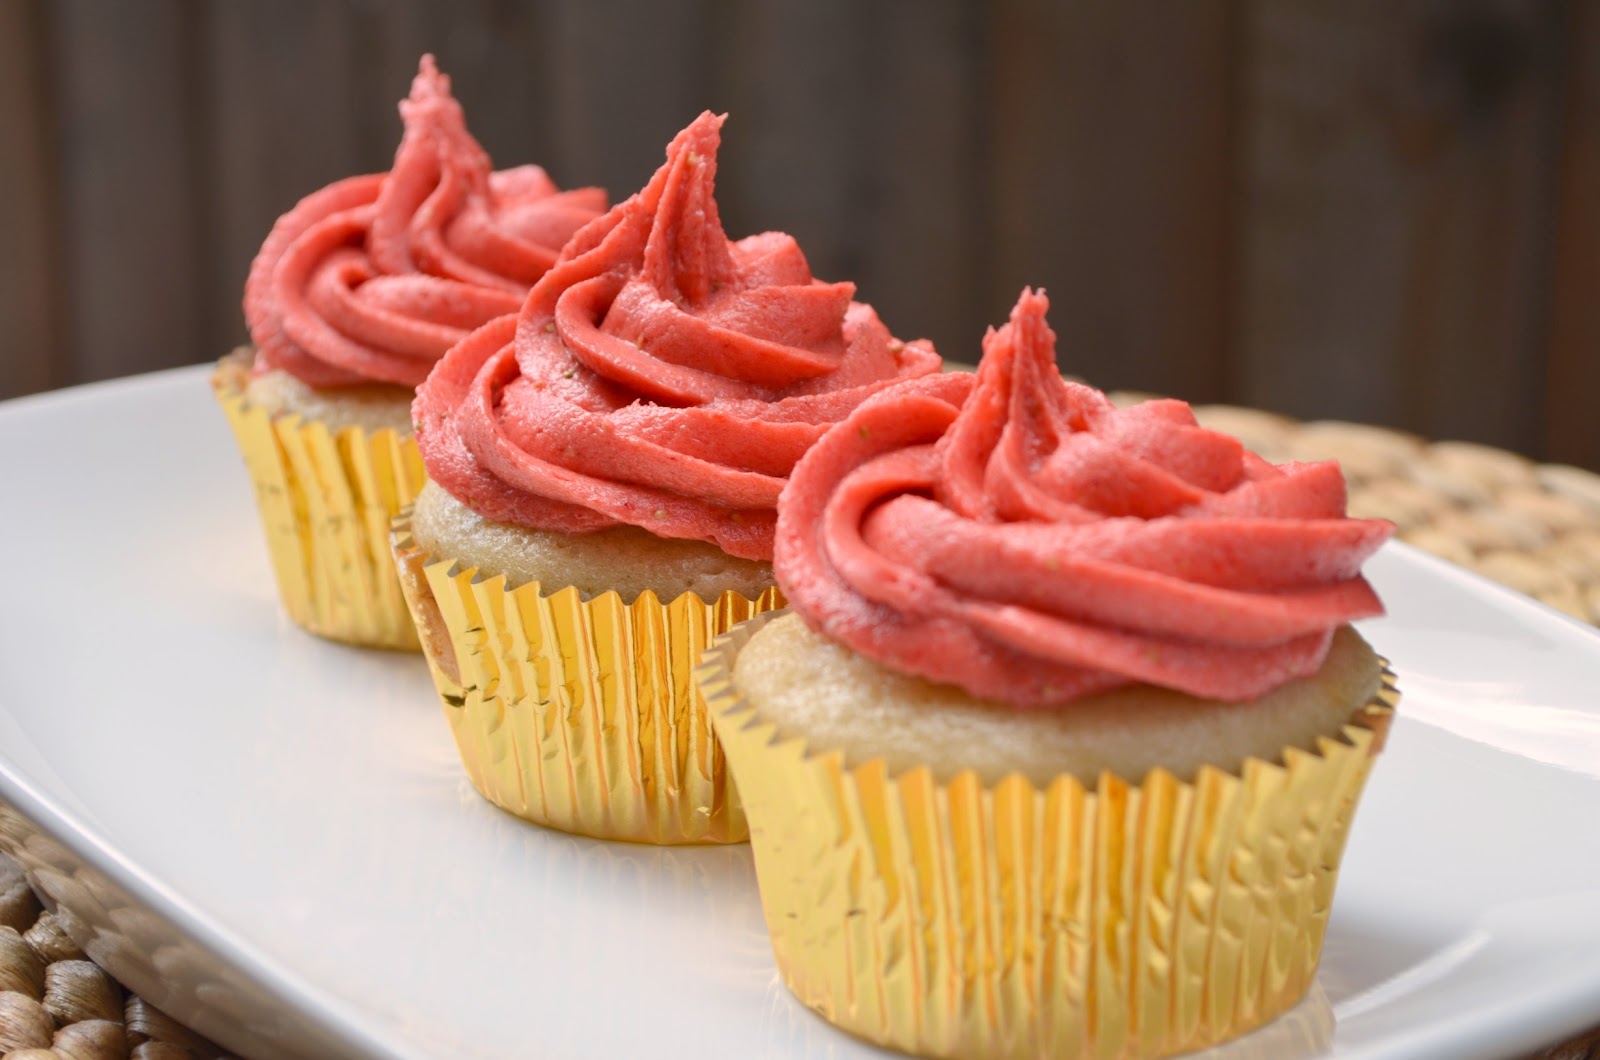 Strawberry Champagne Cupcakes